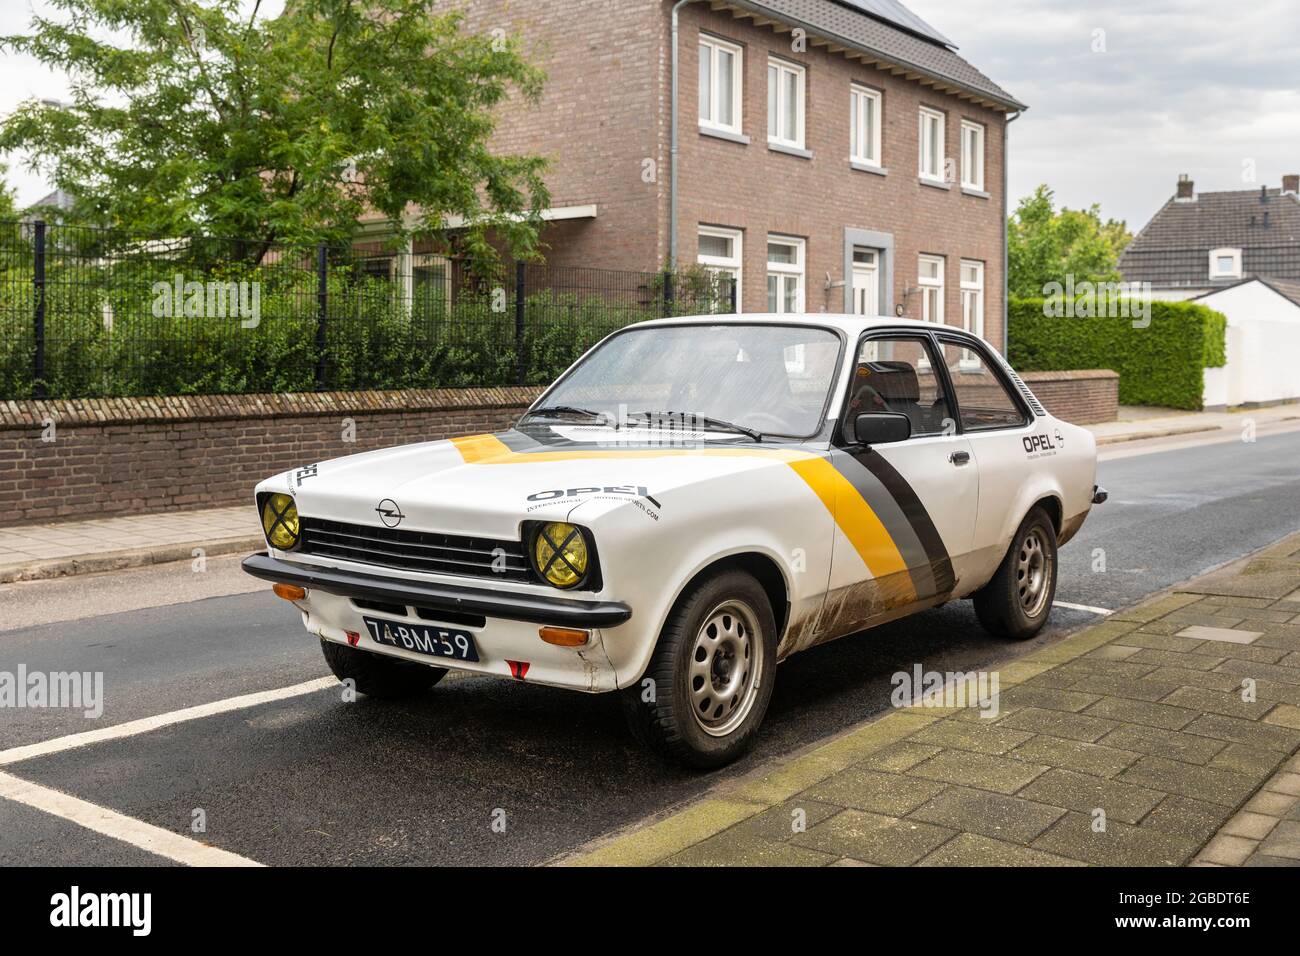 Thorn, The Netherlands, June 24th 2021. A white Opel Kadett yountimer car with yellow, grey and black stripes parked in a street with houses and green Stock Photo